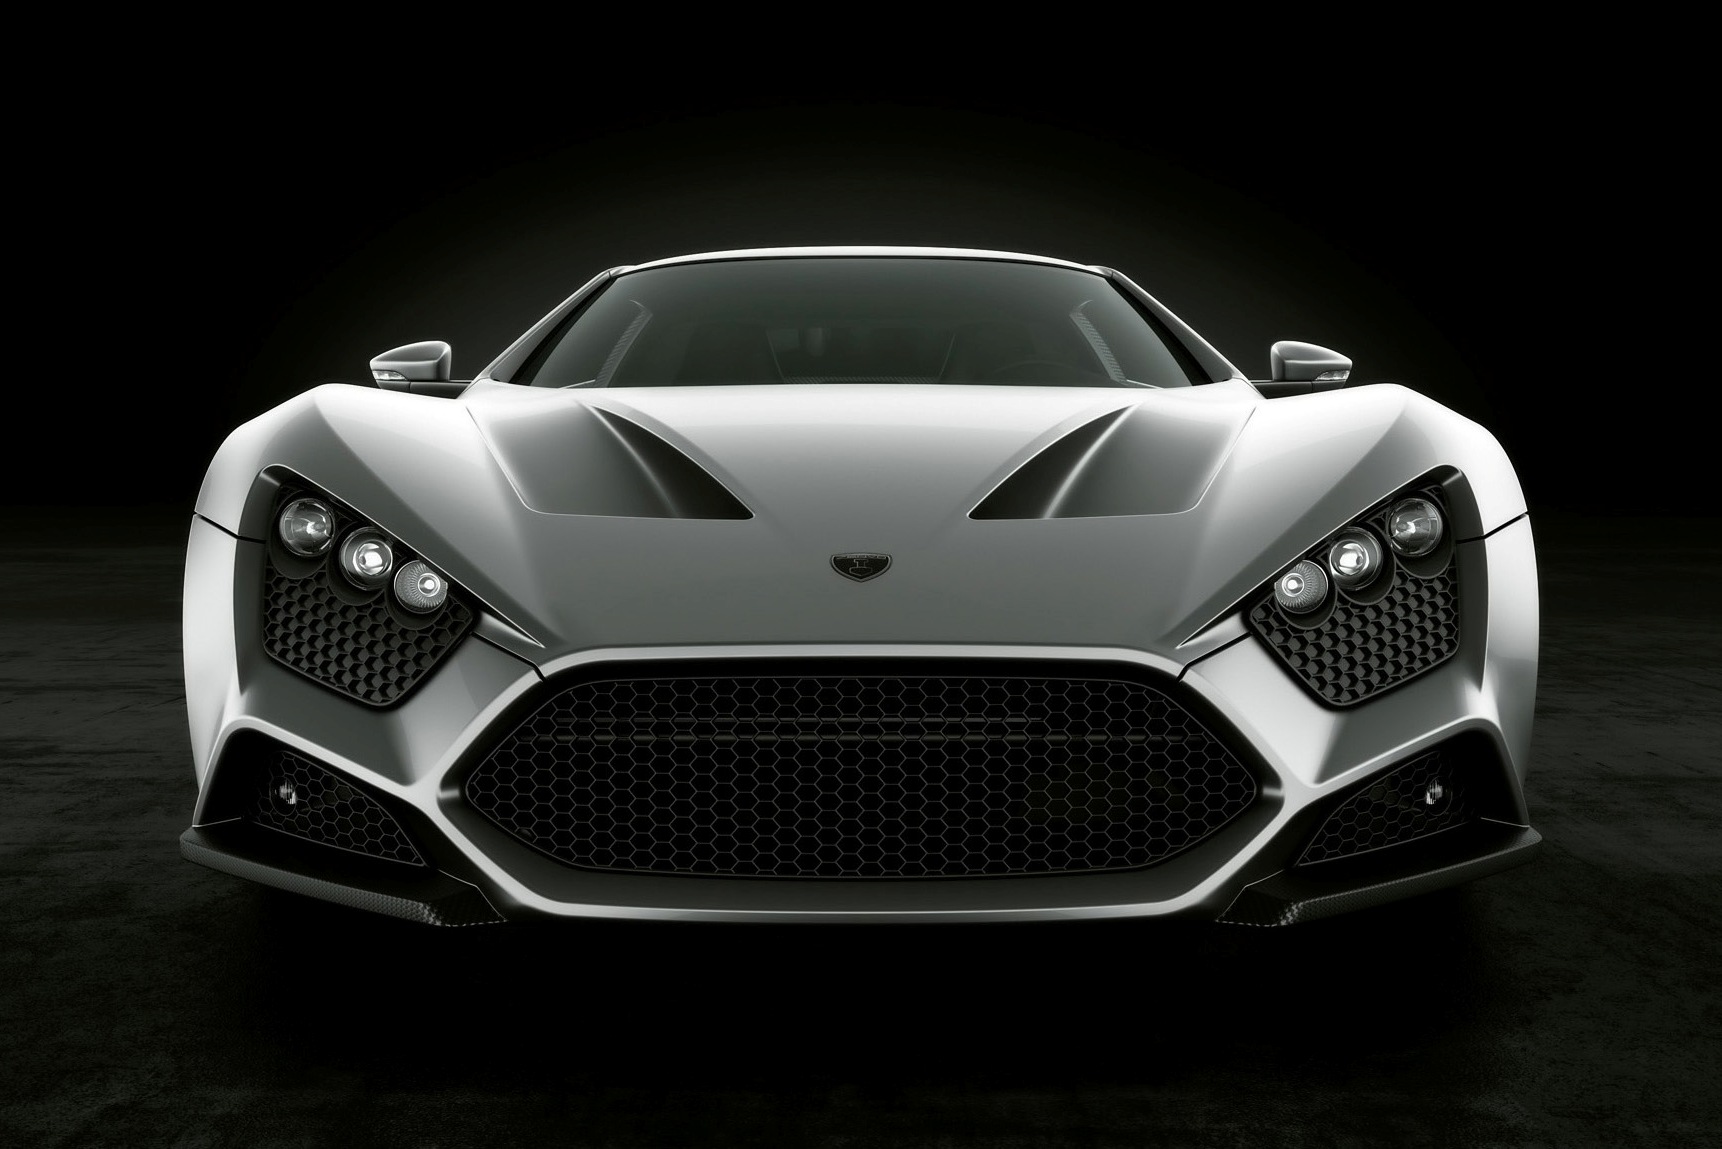 Darth Vader Would Drive This The Zenvo St1 My Car Heaven